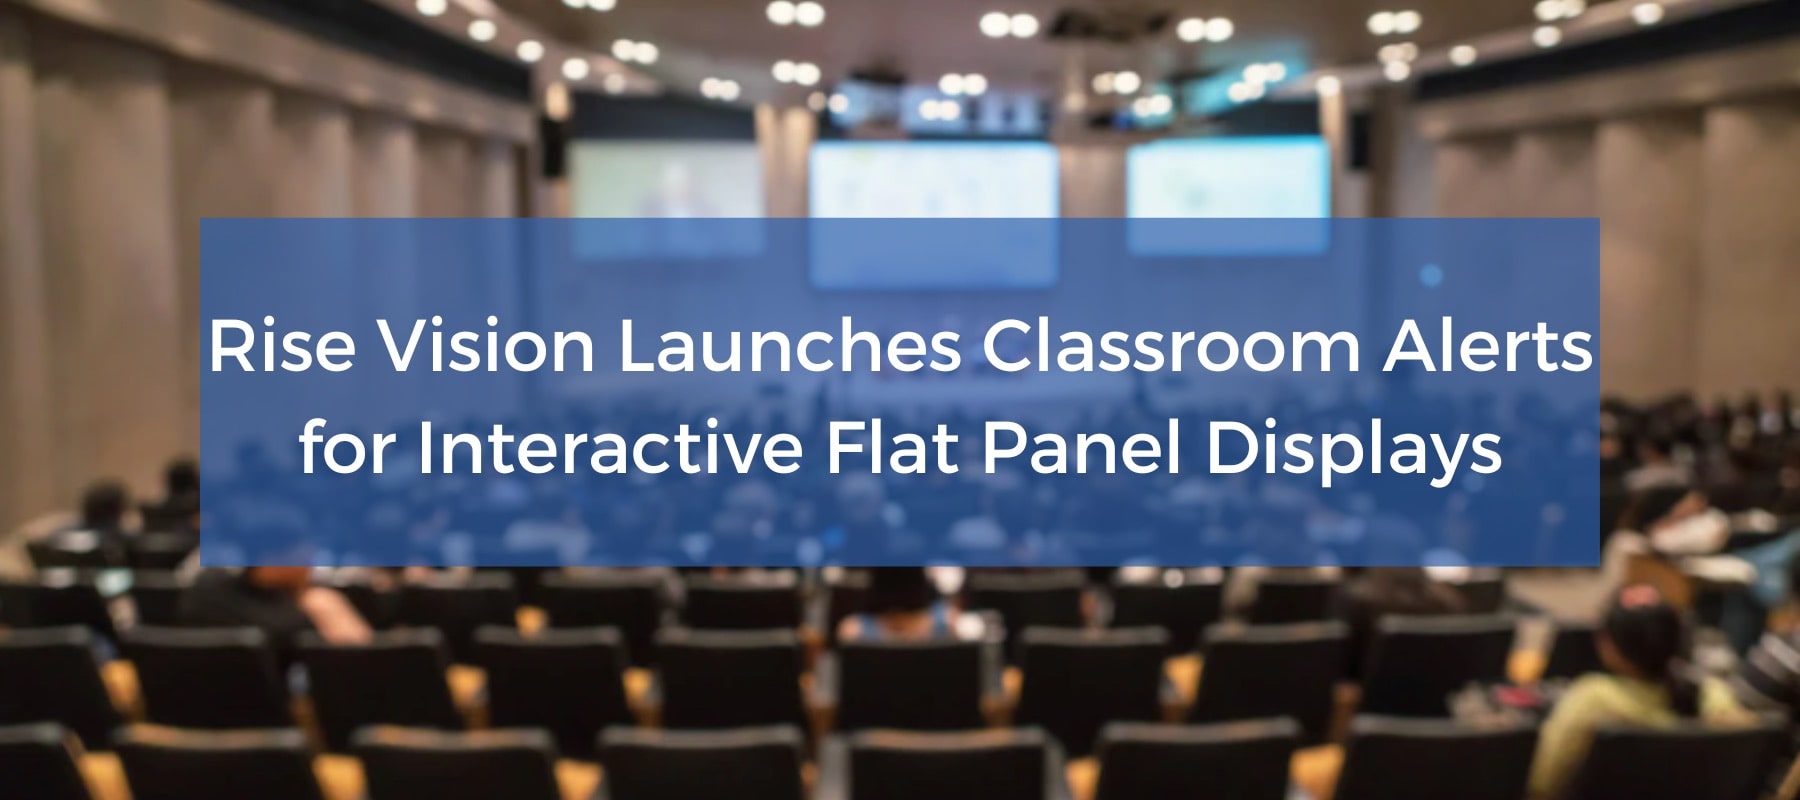 Rise vision launches classroom alerts for interactive flat panel displays.